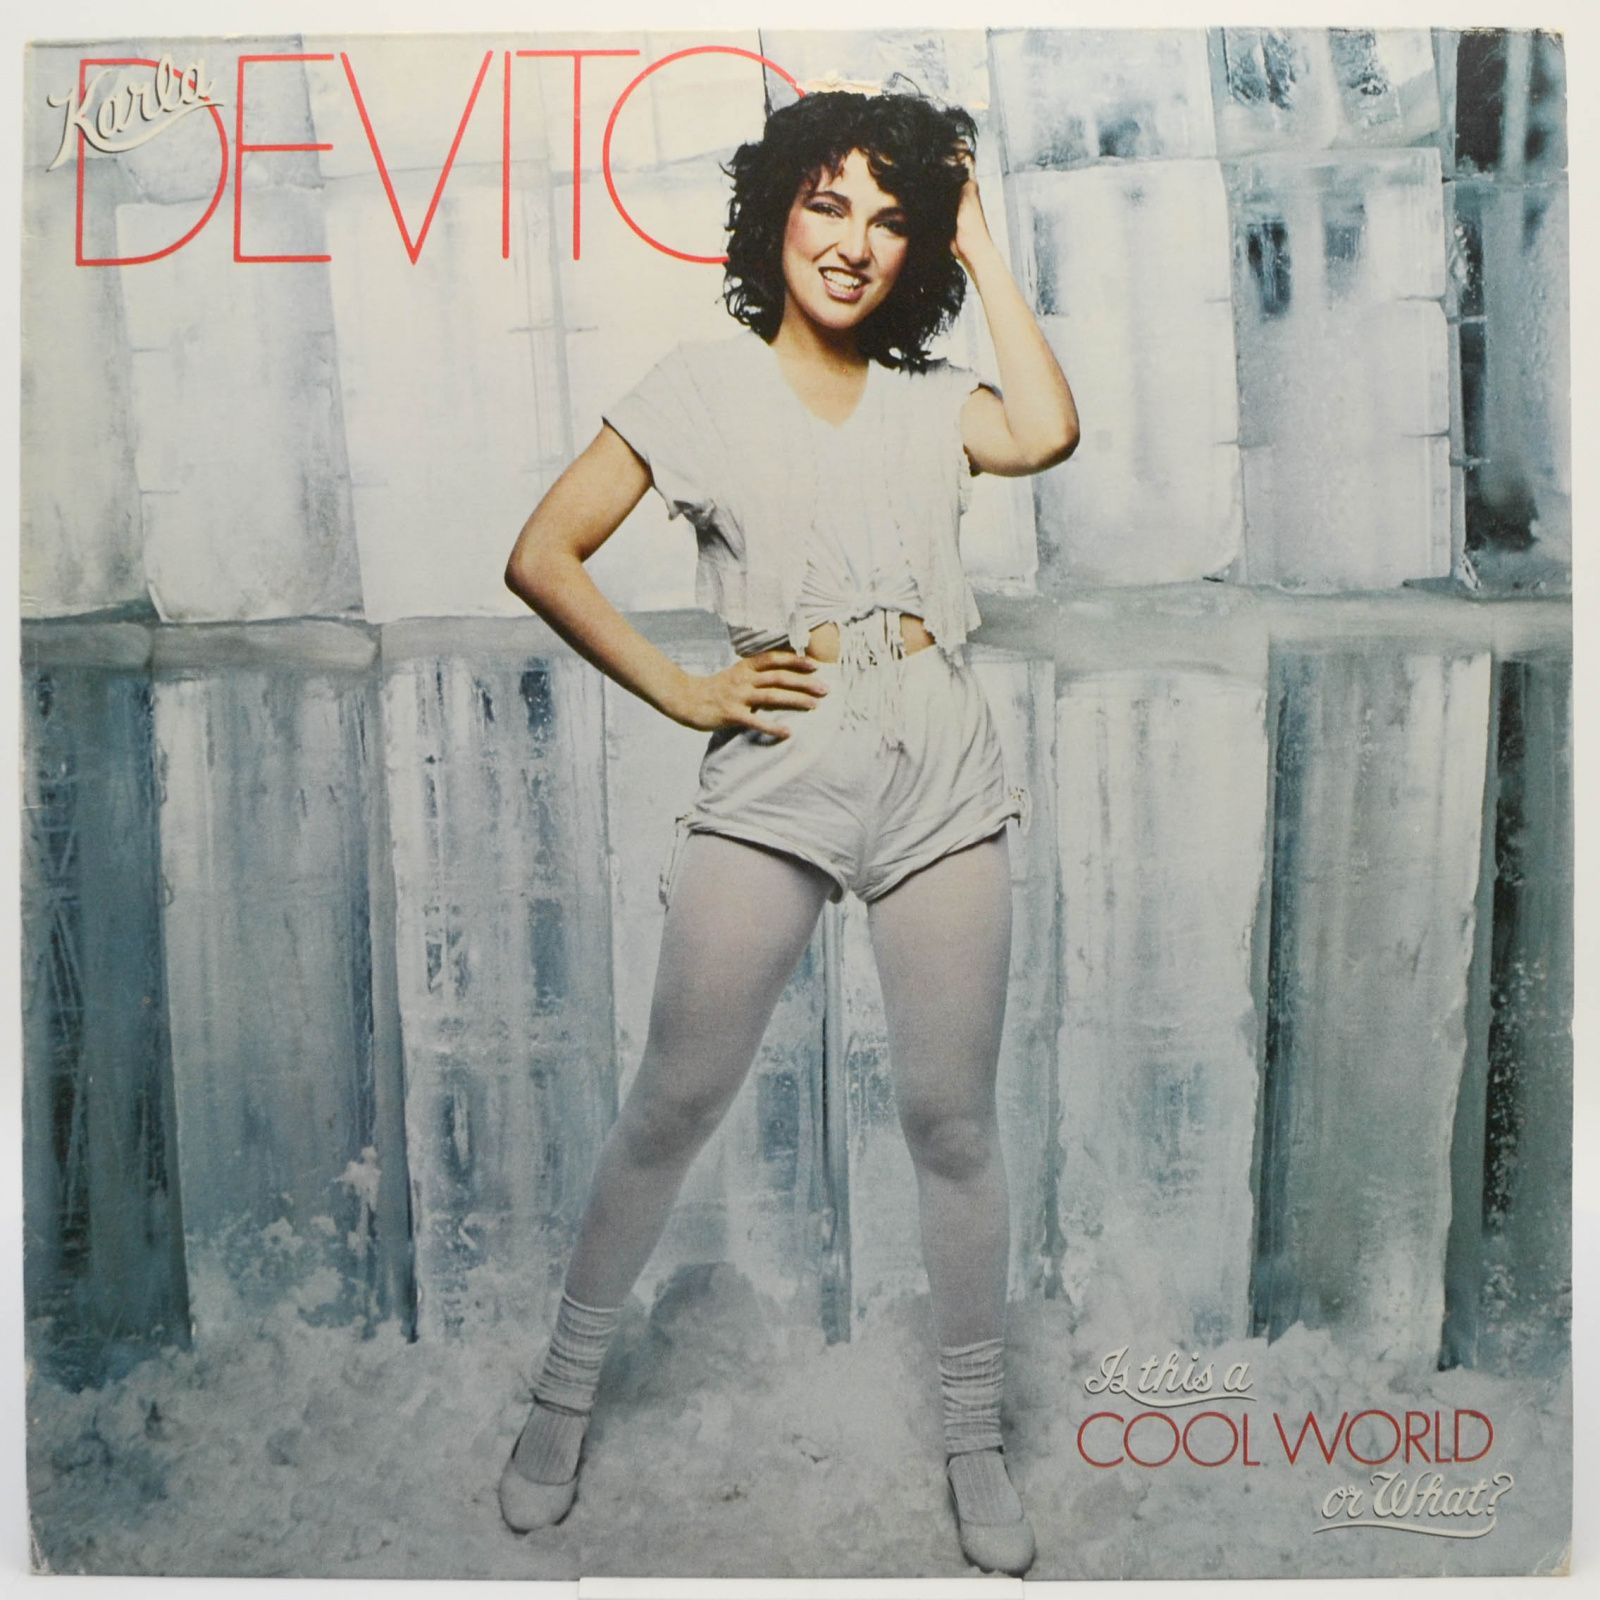 Is This A Cool World Or What?, 1981